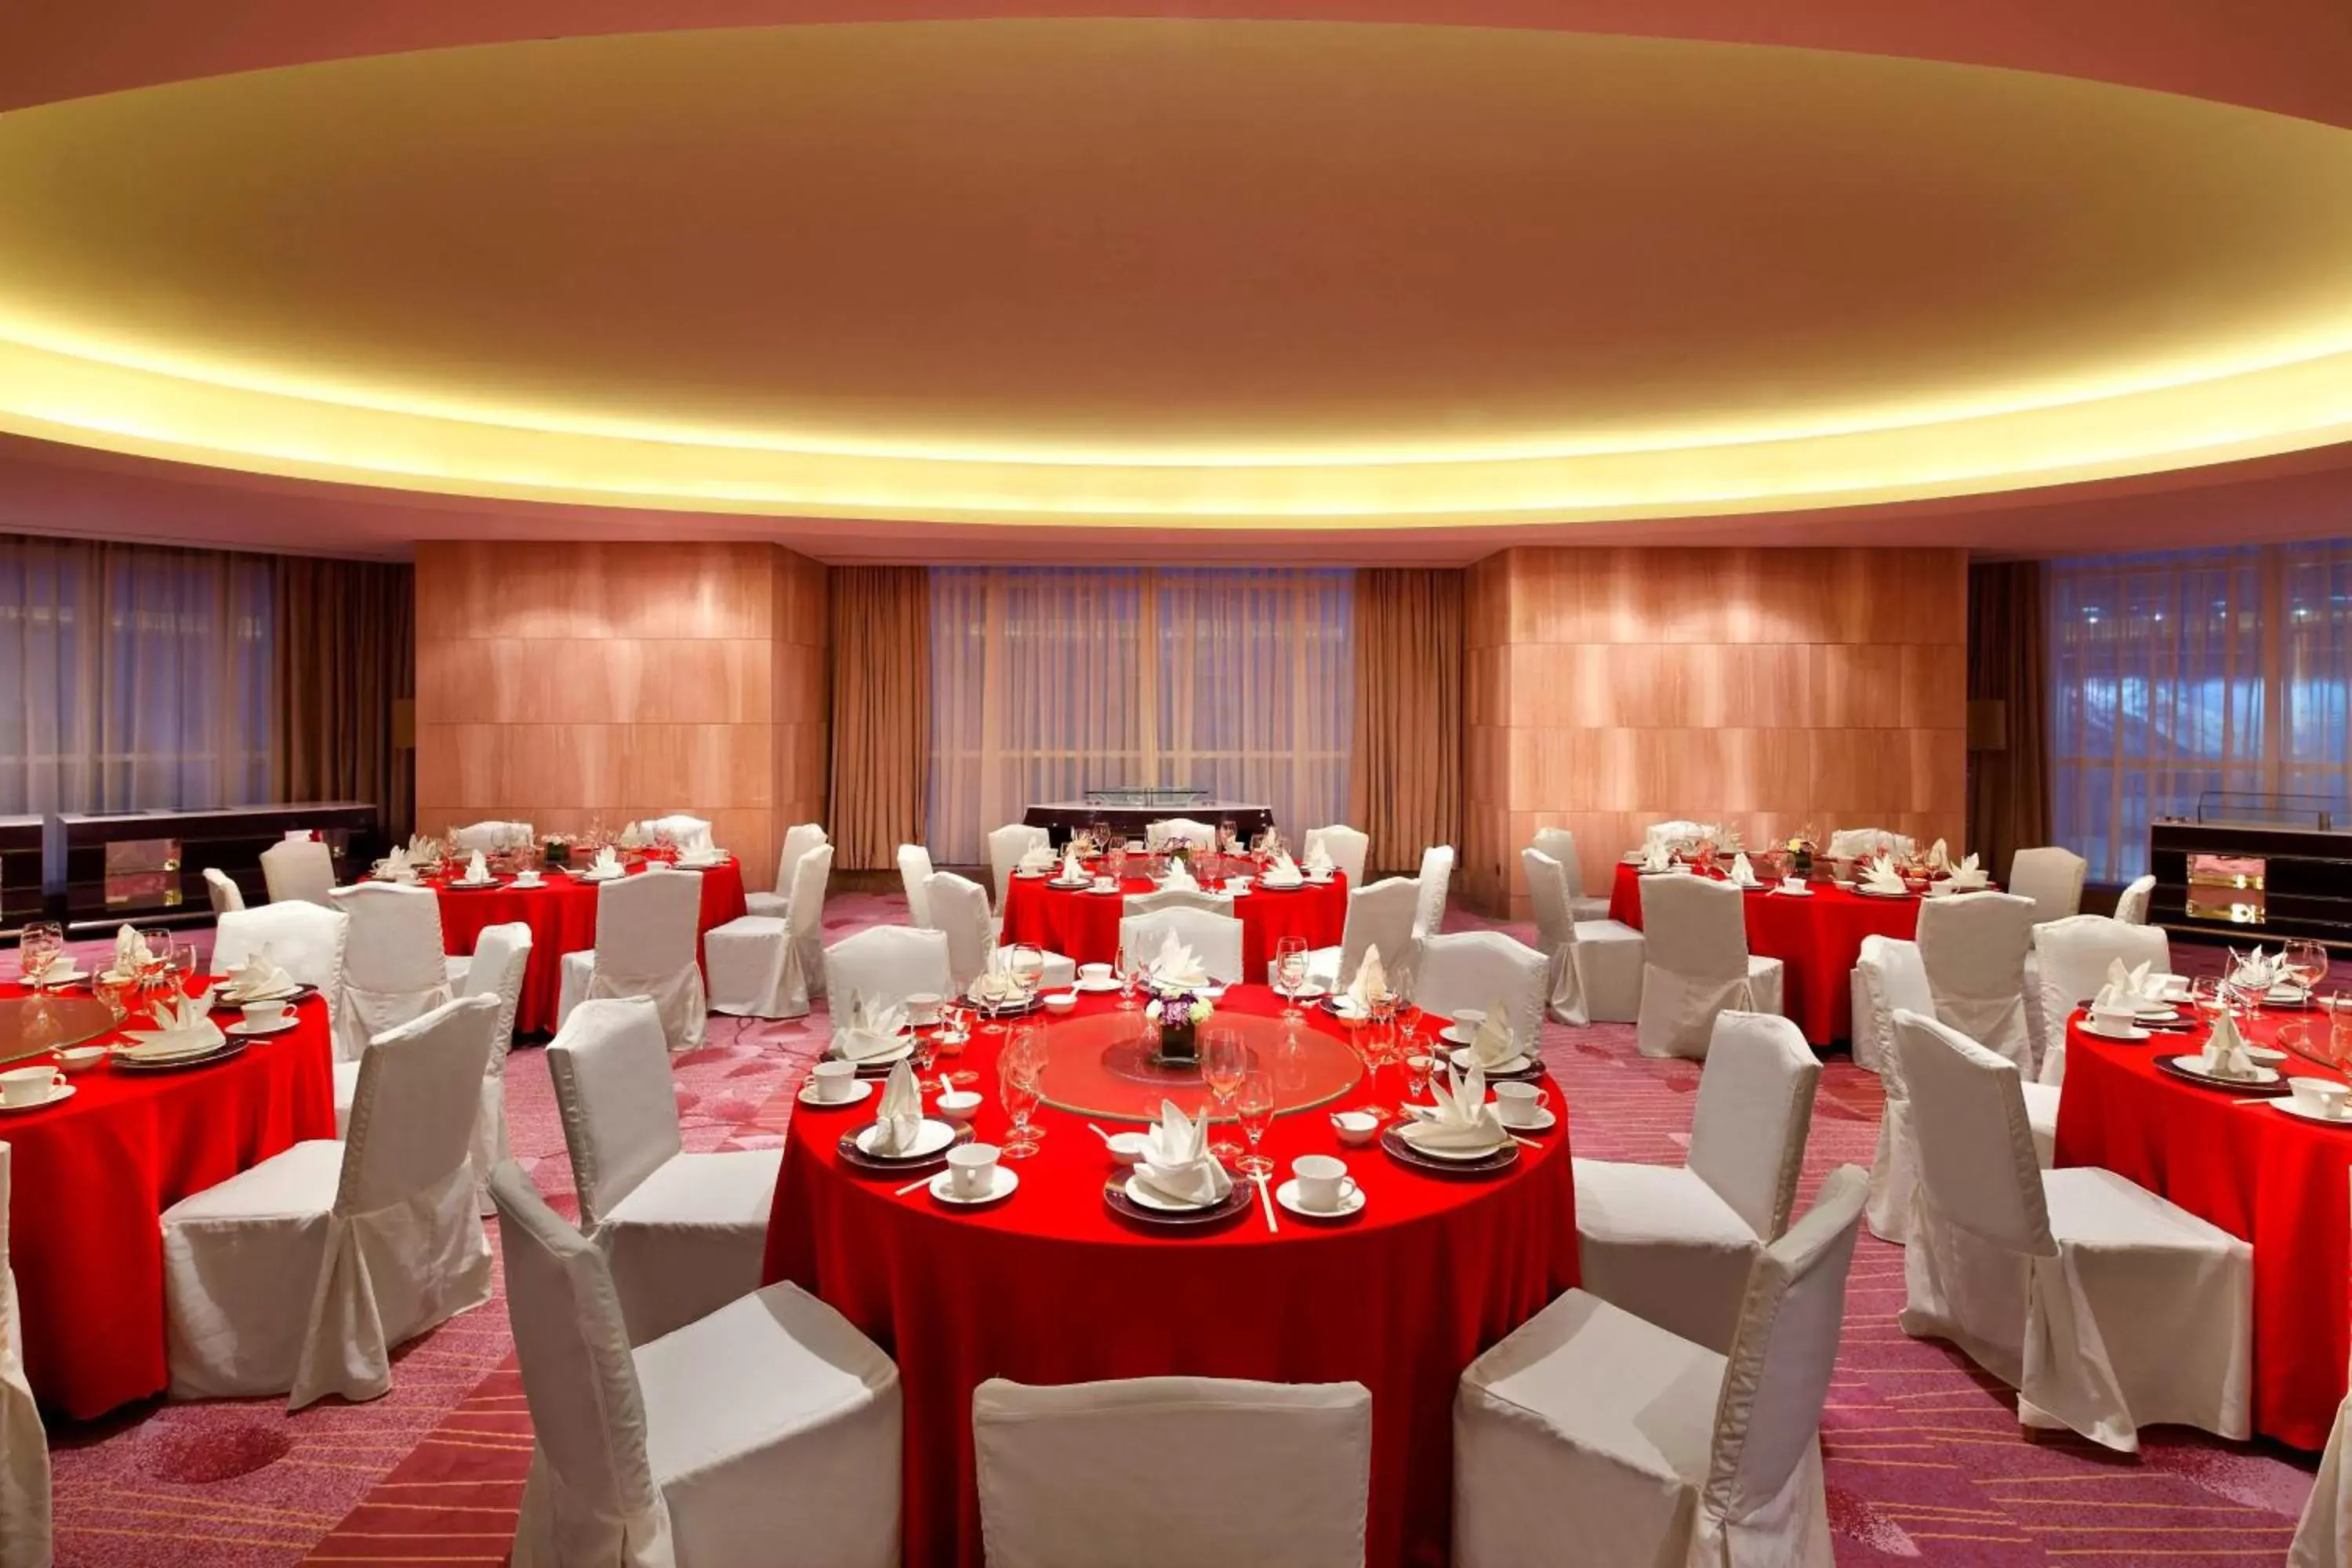 Meeting/conference room, Banquet Facilities in Sheraton Guangzhou Hotel